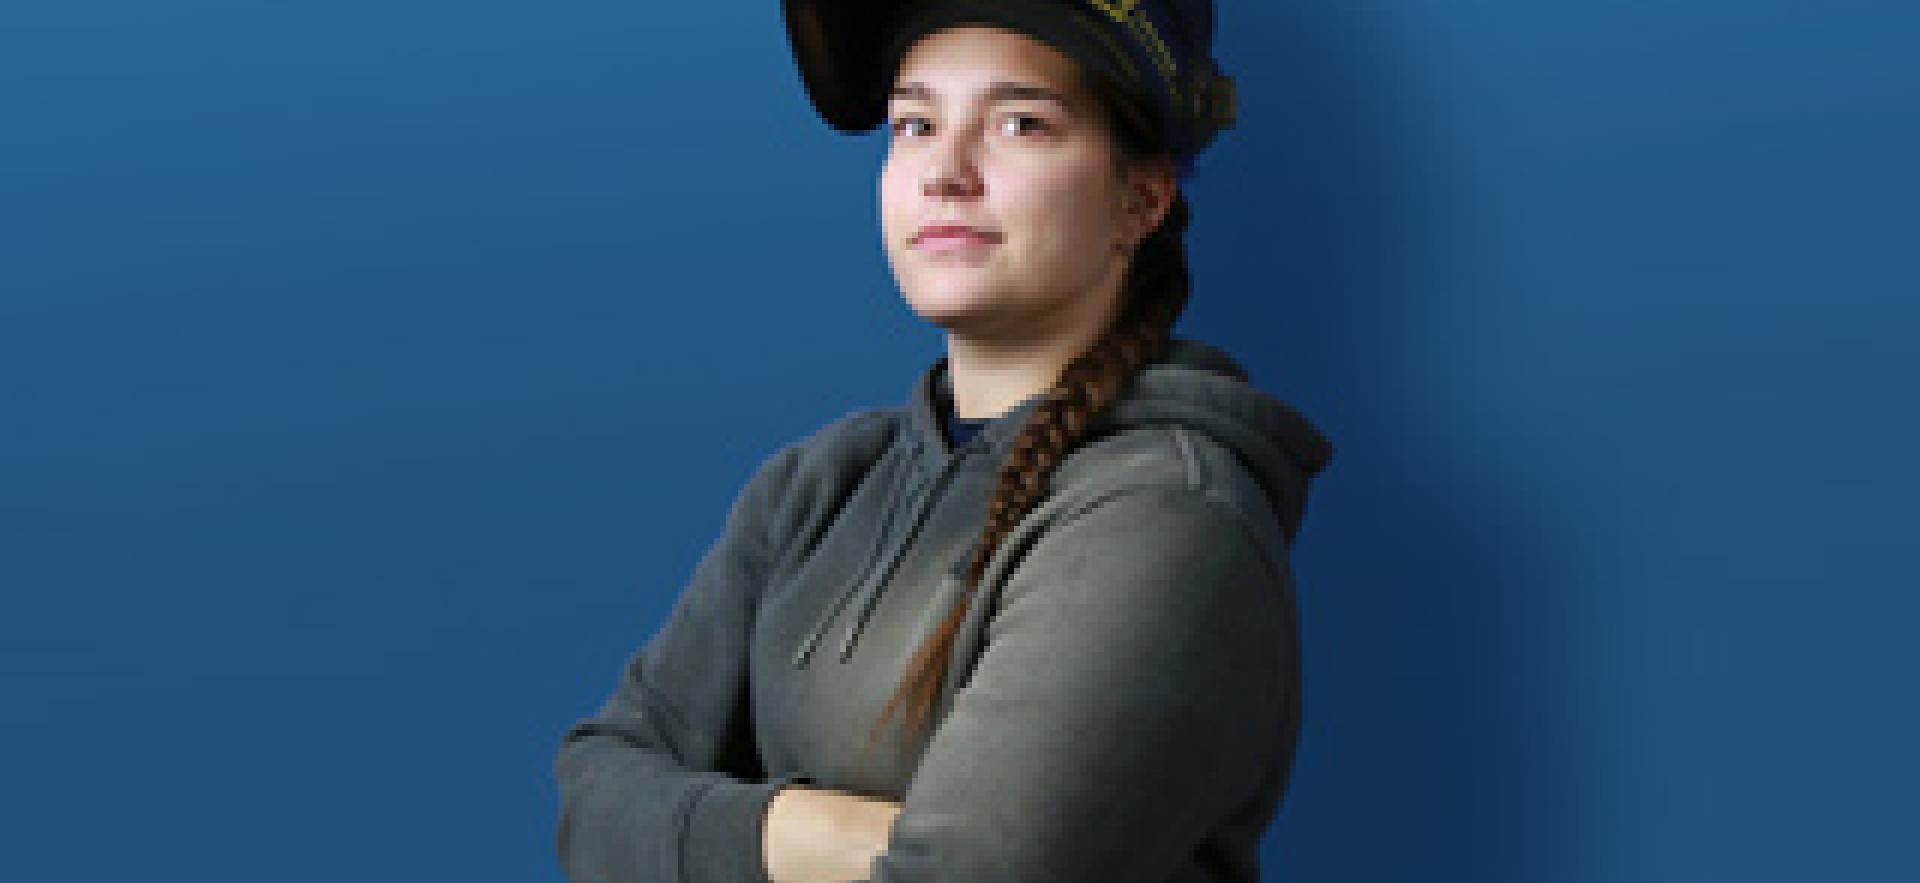 Skilled Trades student wearing a welding mask lifted up off her face standing in front of blue background with text YOUR TIME TO BE SKILLED